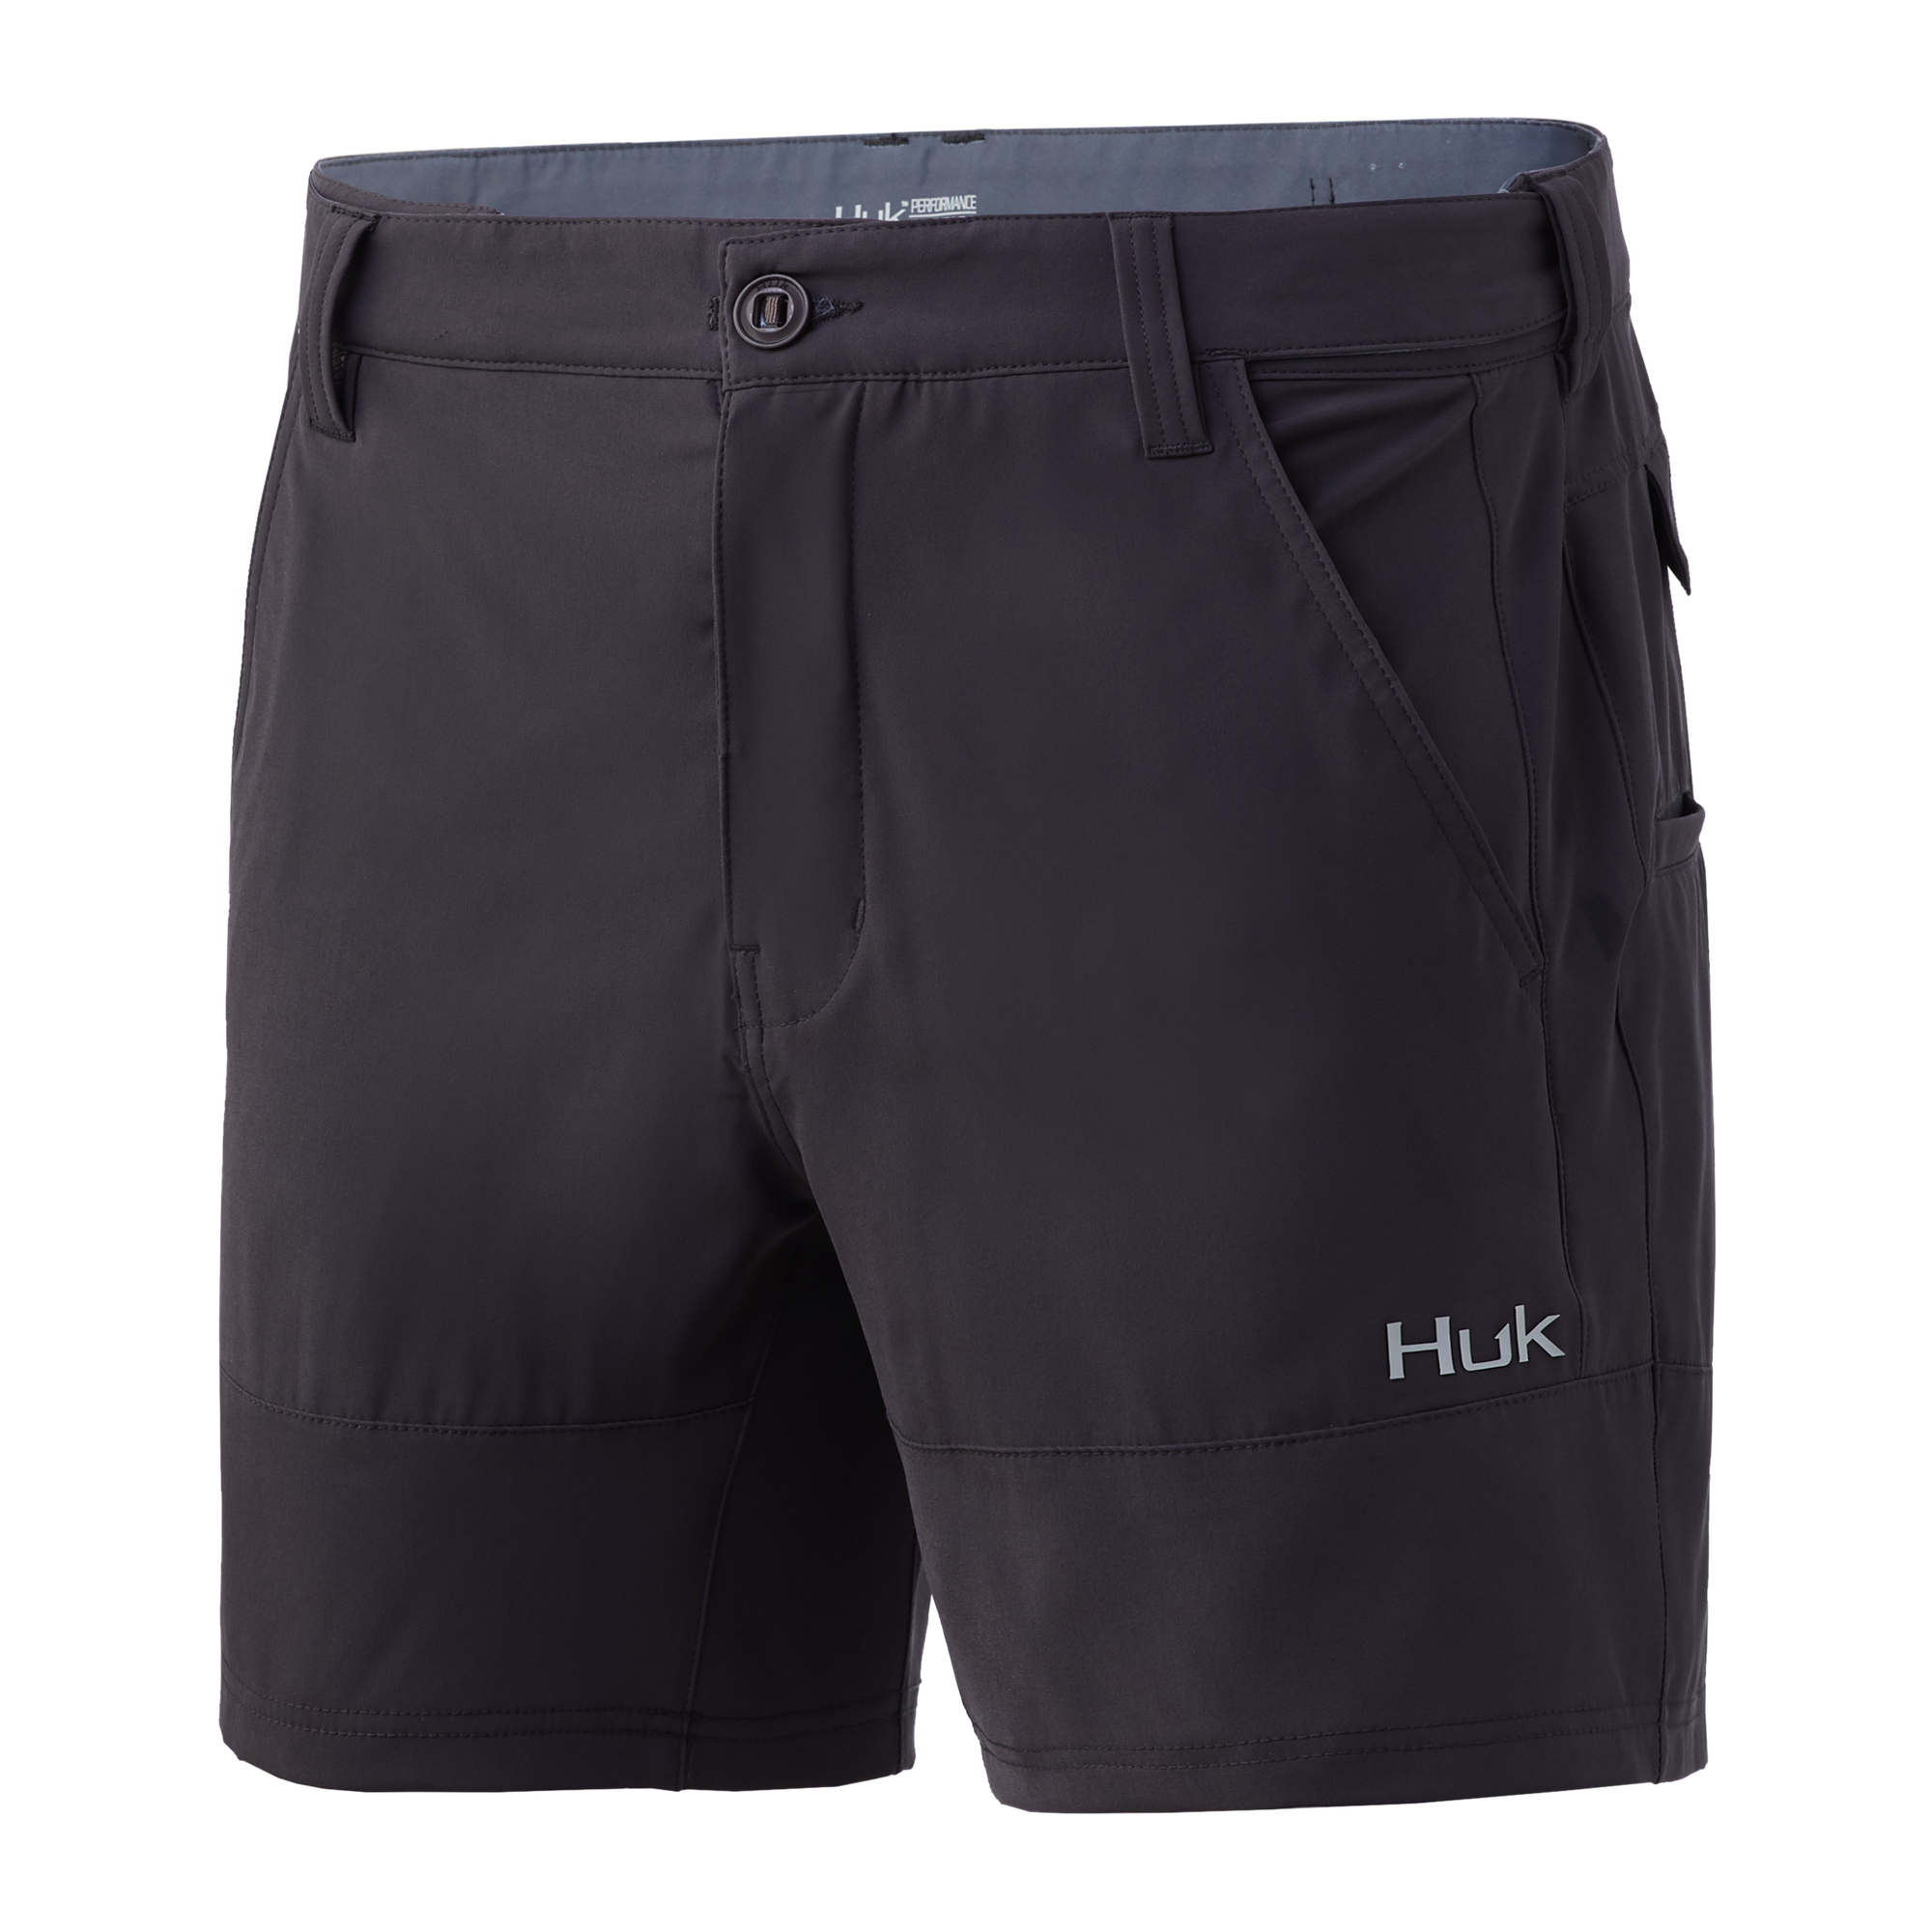 Huk Lowcountry Men’s Performance Short 6 with Pockets